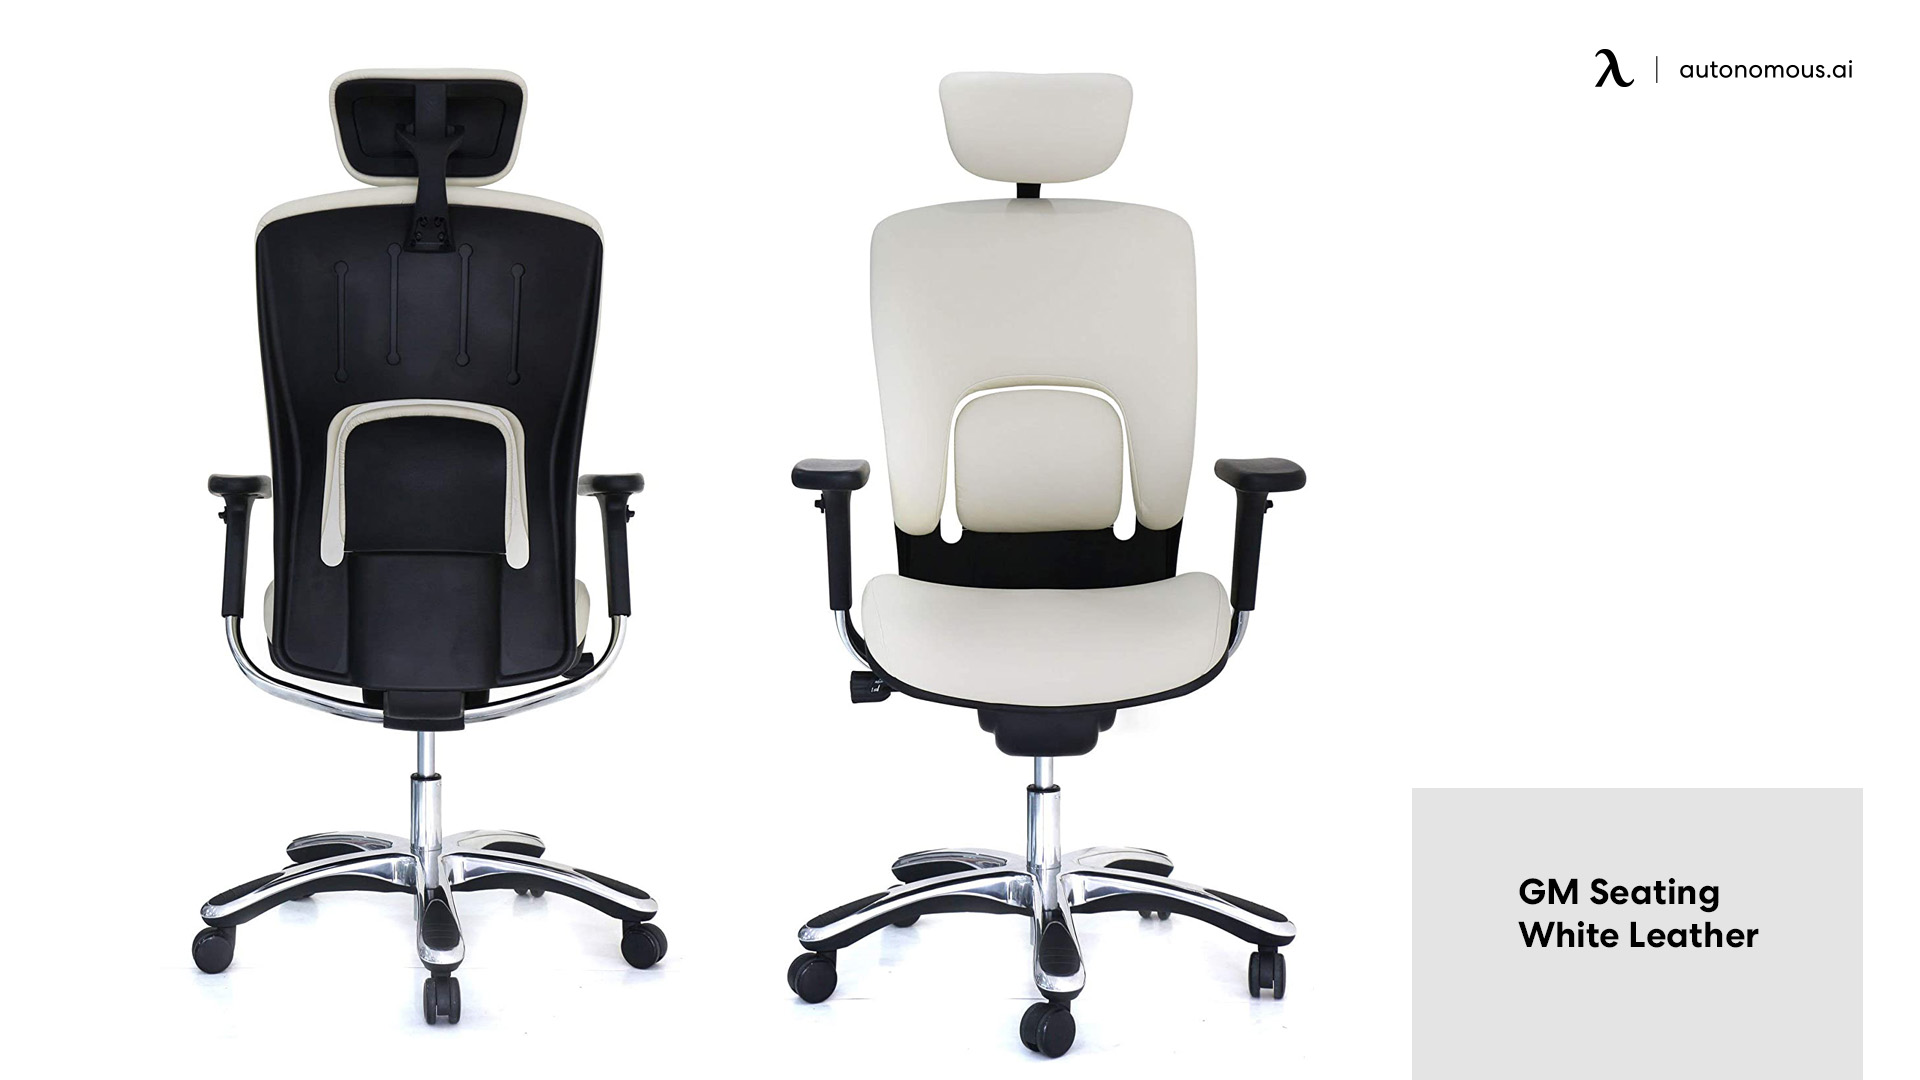 GM Seating White Leather